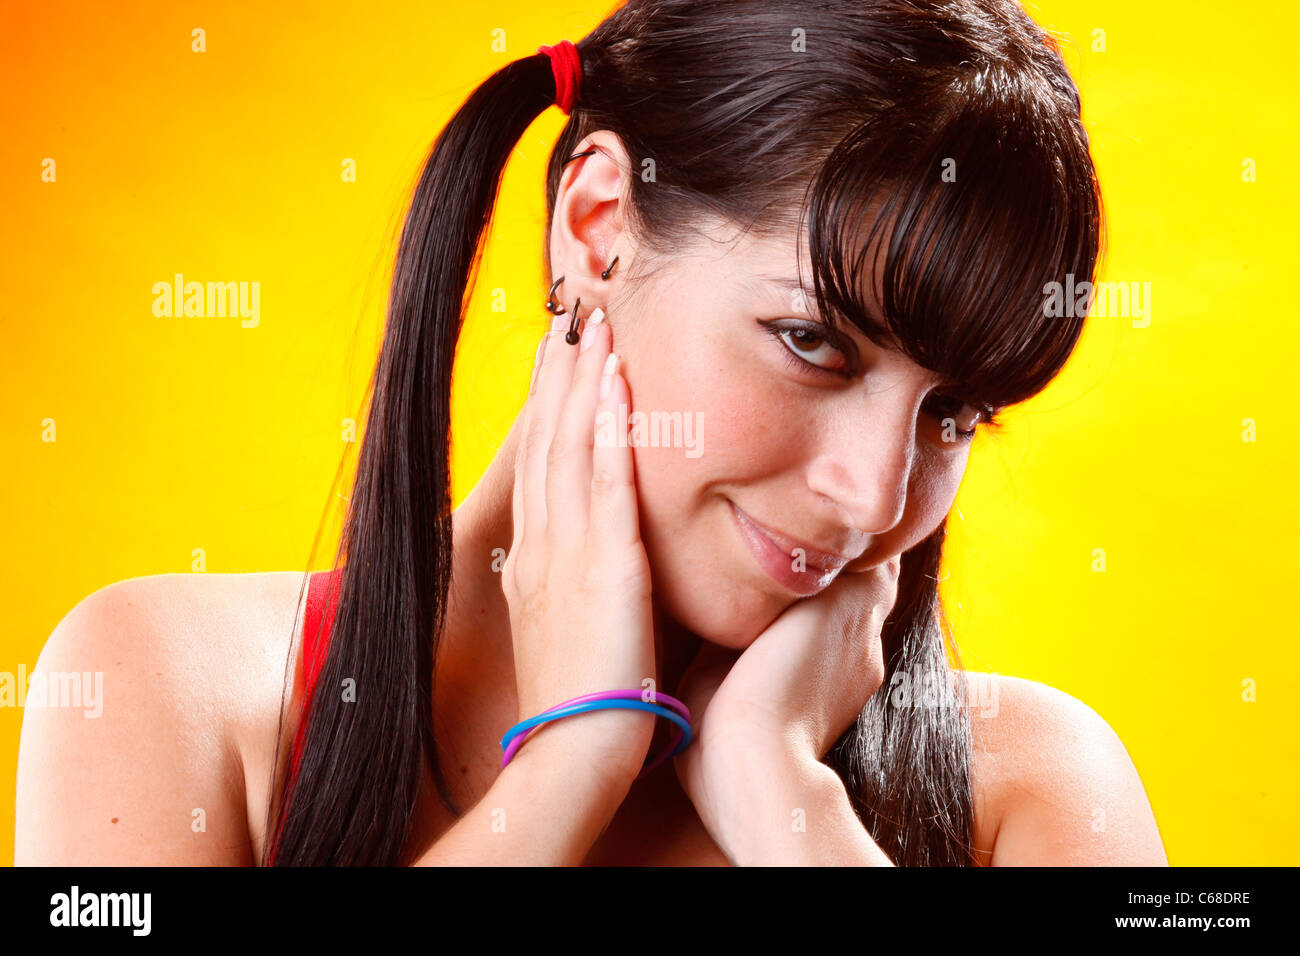 Young brunette's facial expression Stock Photo